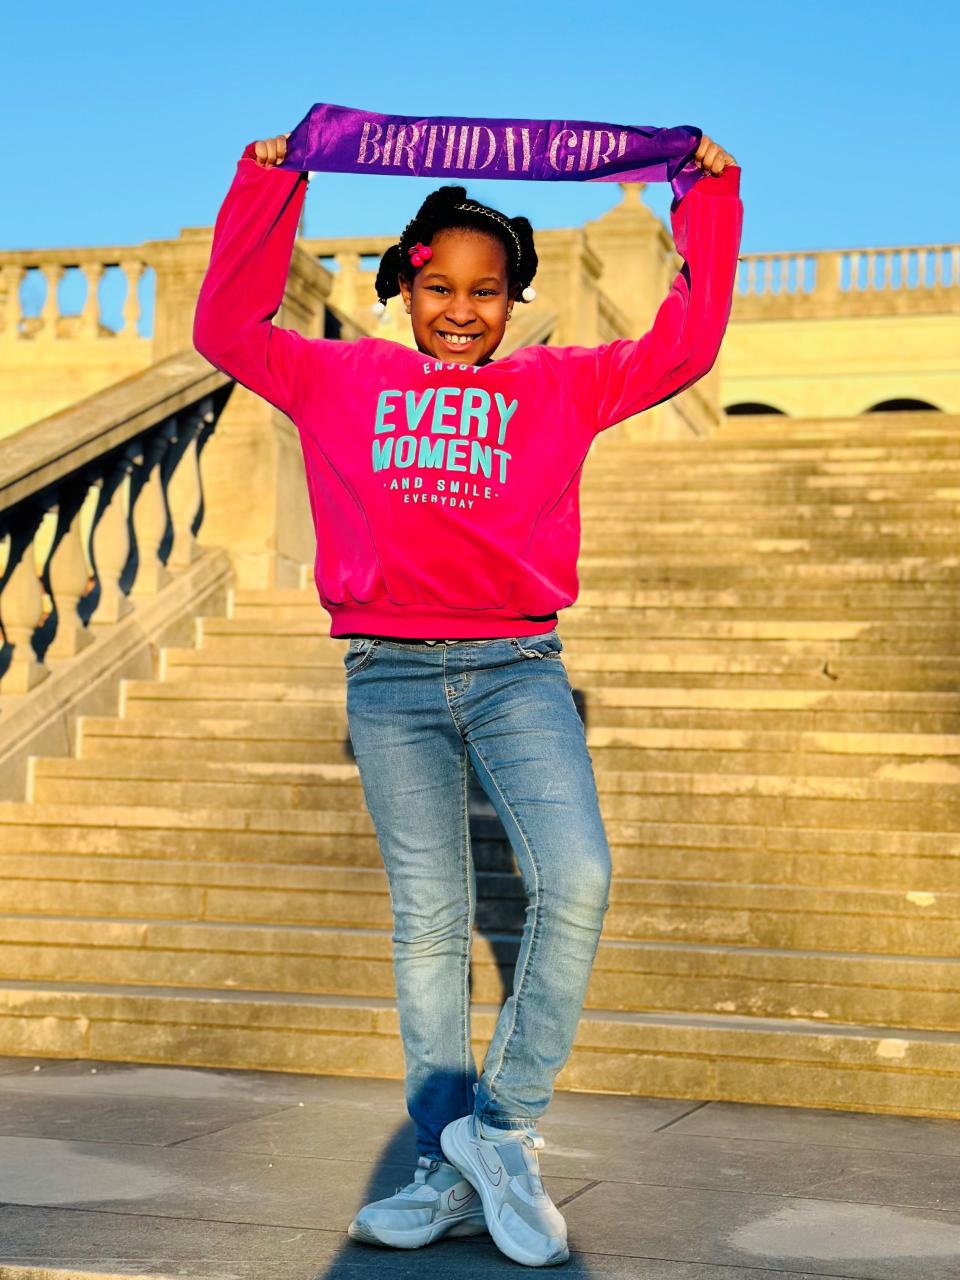 Zuri Wilder turns 8 years old on Feb. 29, 2024. She is one of an estimated 5 million people worldwide born on Leap Day. Zuri and her late great grandmother, Virginia Jones, are both leaplings.